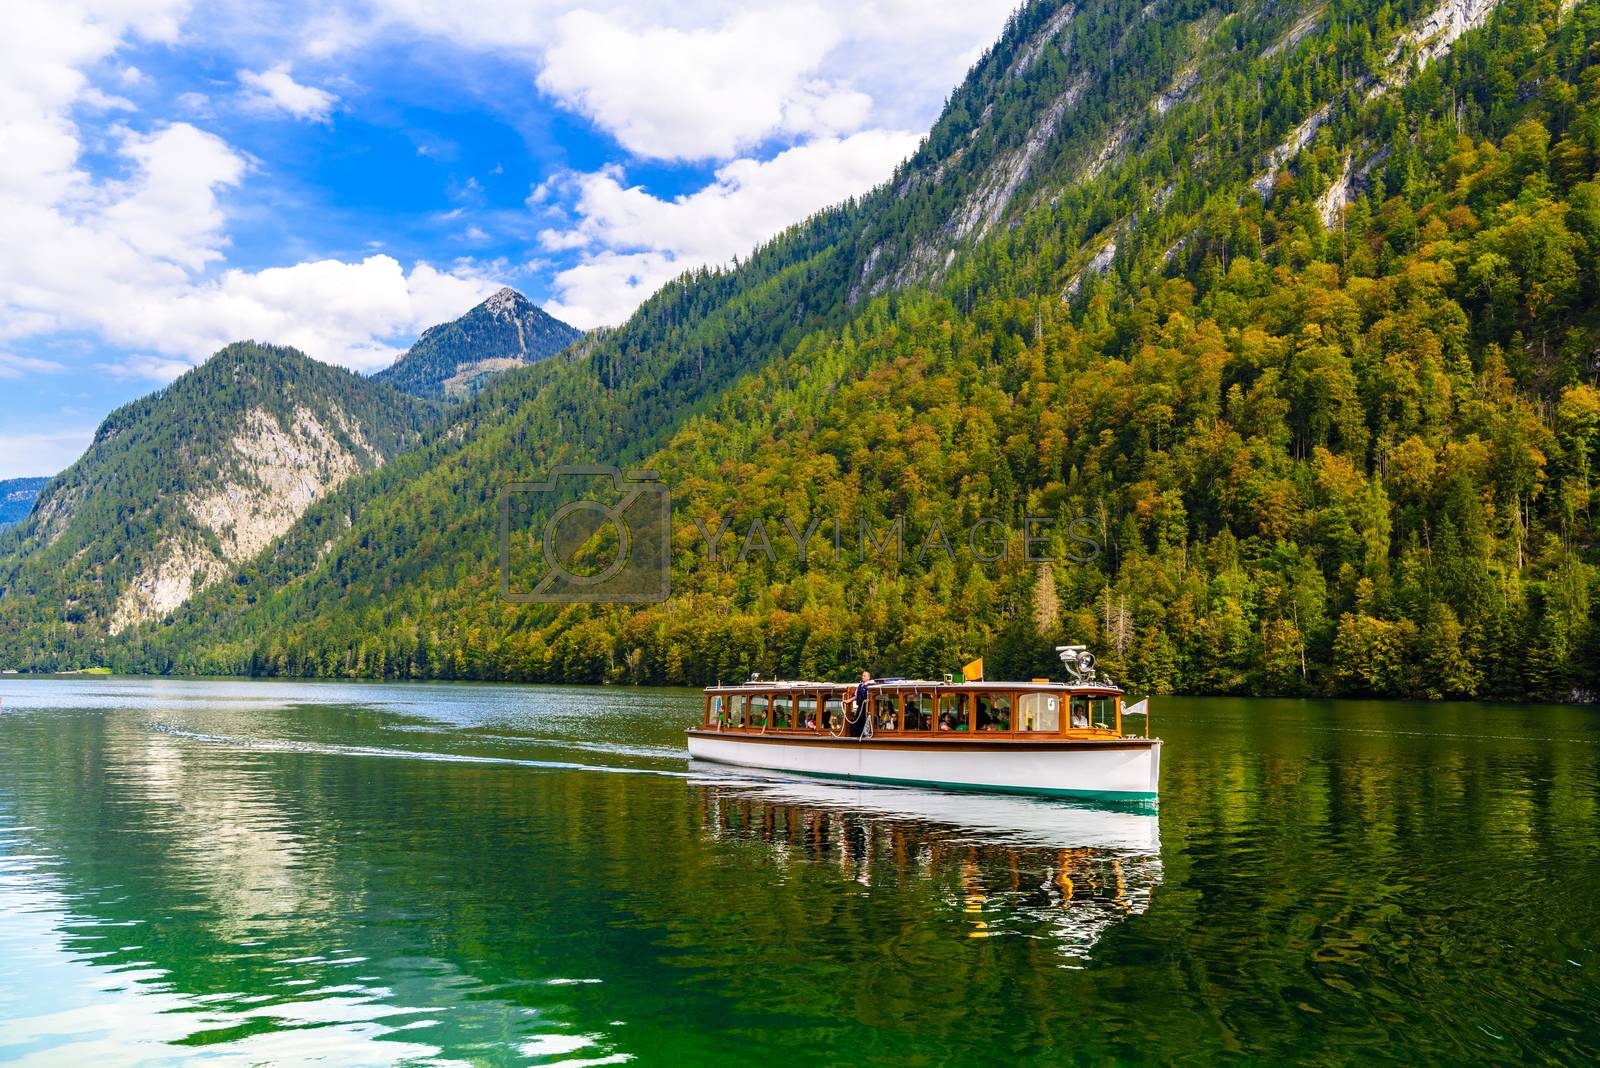 Royalty Free Image | Electric boat in Koenigssee, Konigsee, Berchtesgaden National Pa by Eagle2308